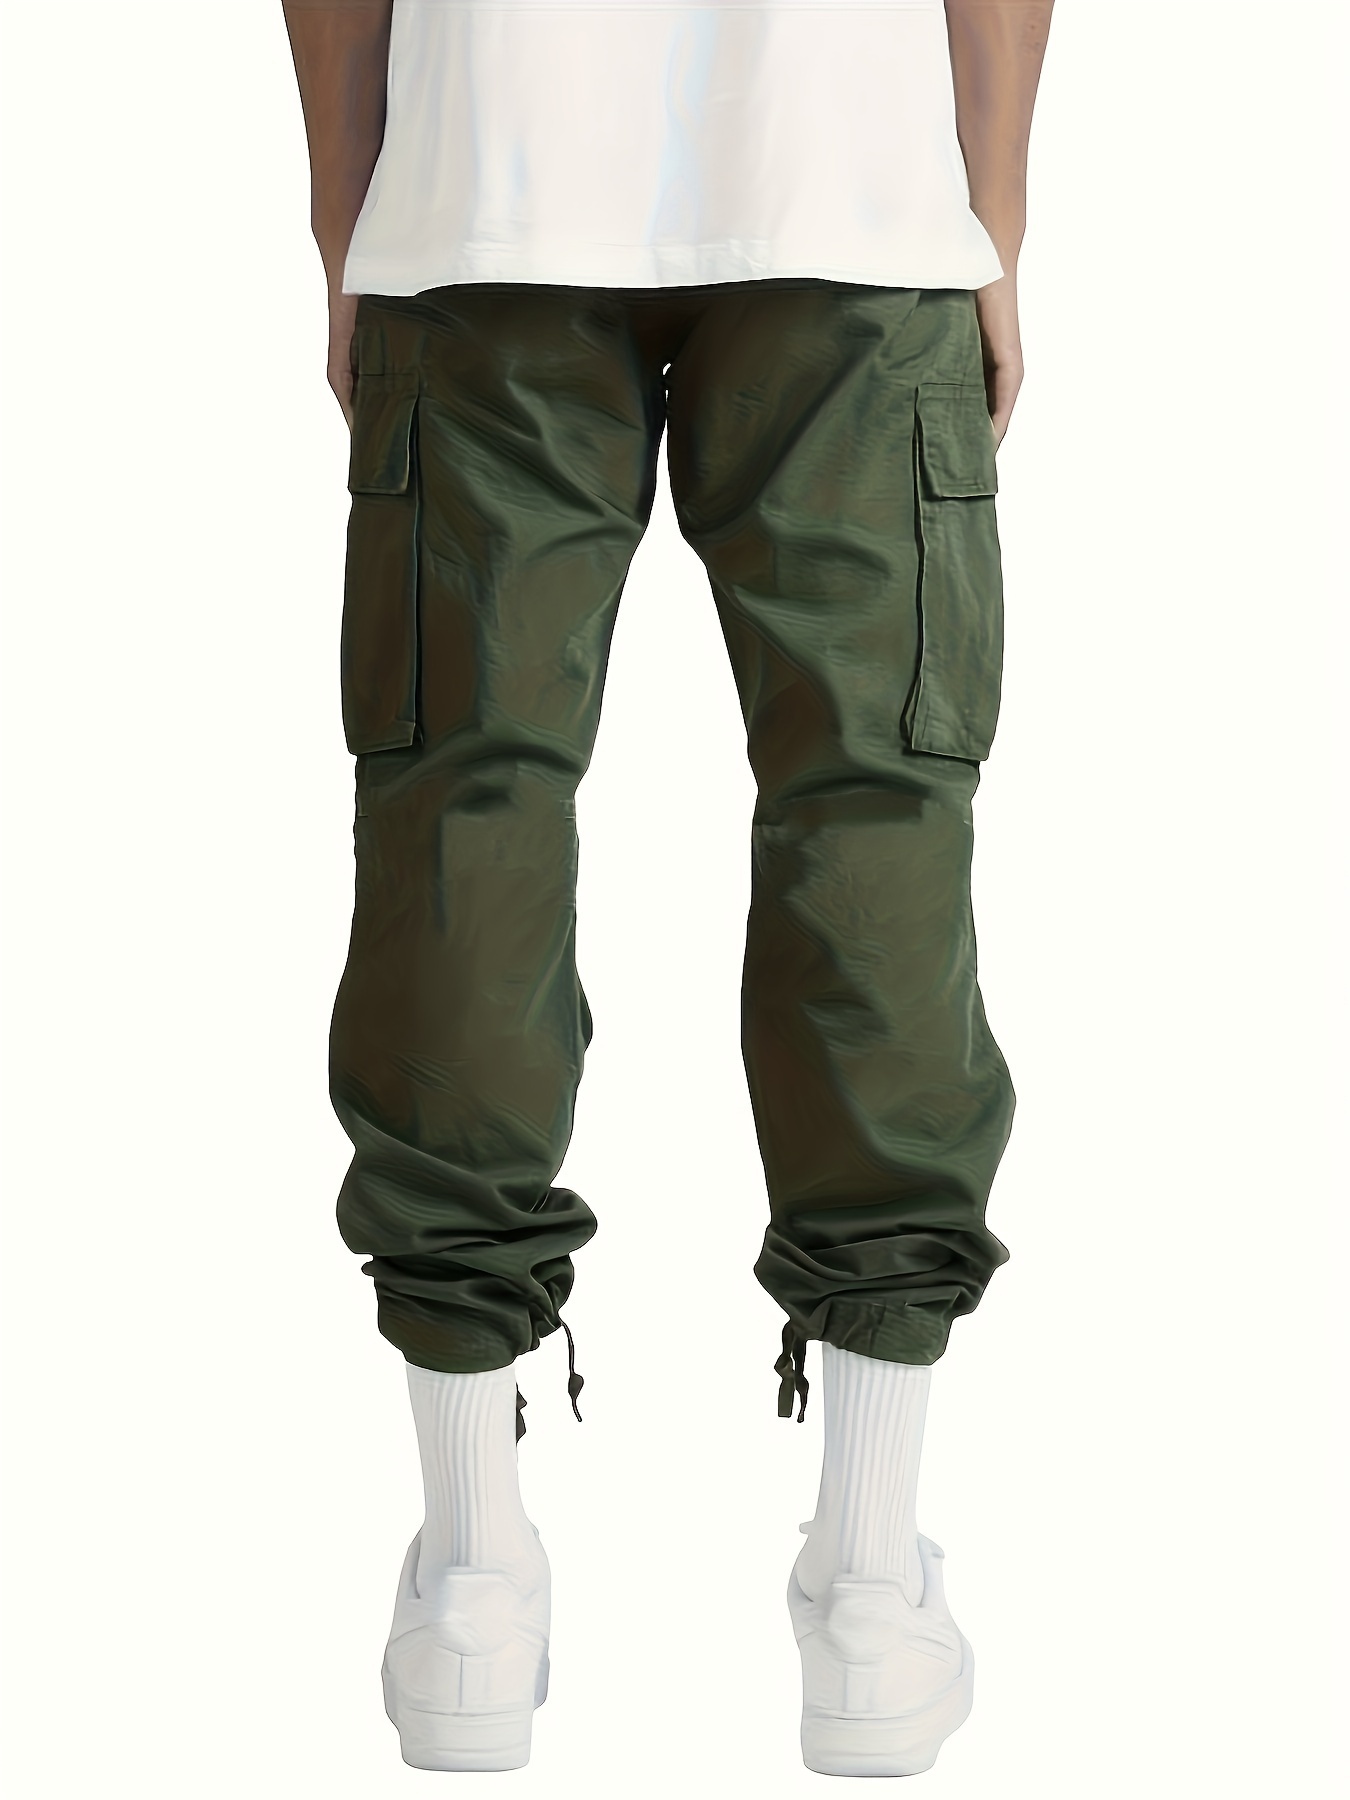 Best Deal for Relaxed Fit Cargo Pants for Men Vintage Cargo Pants